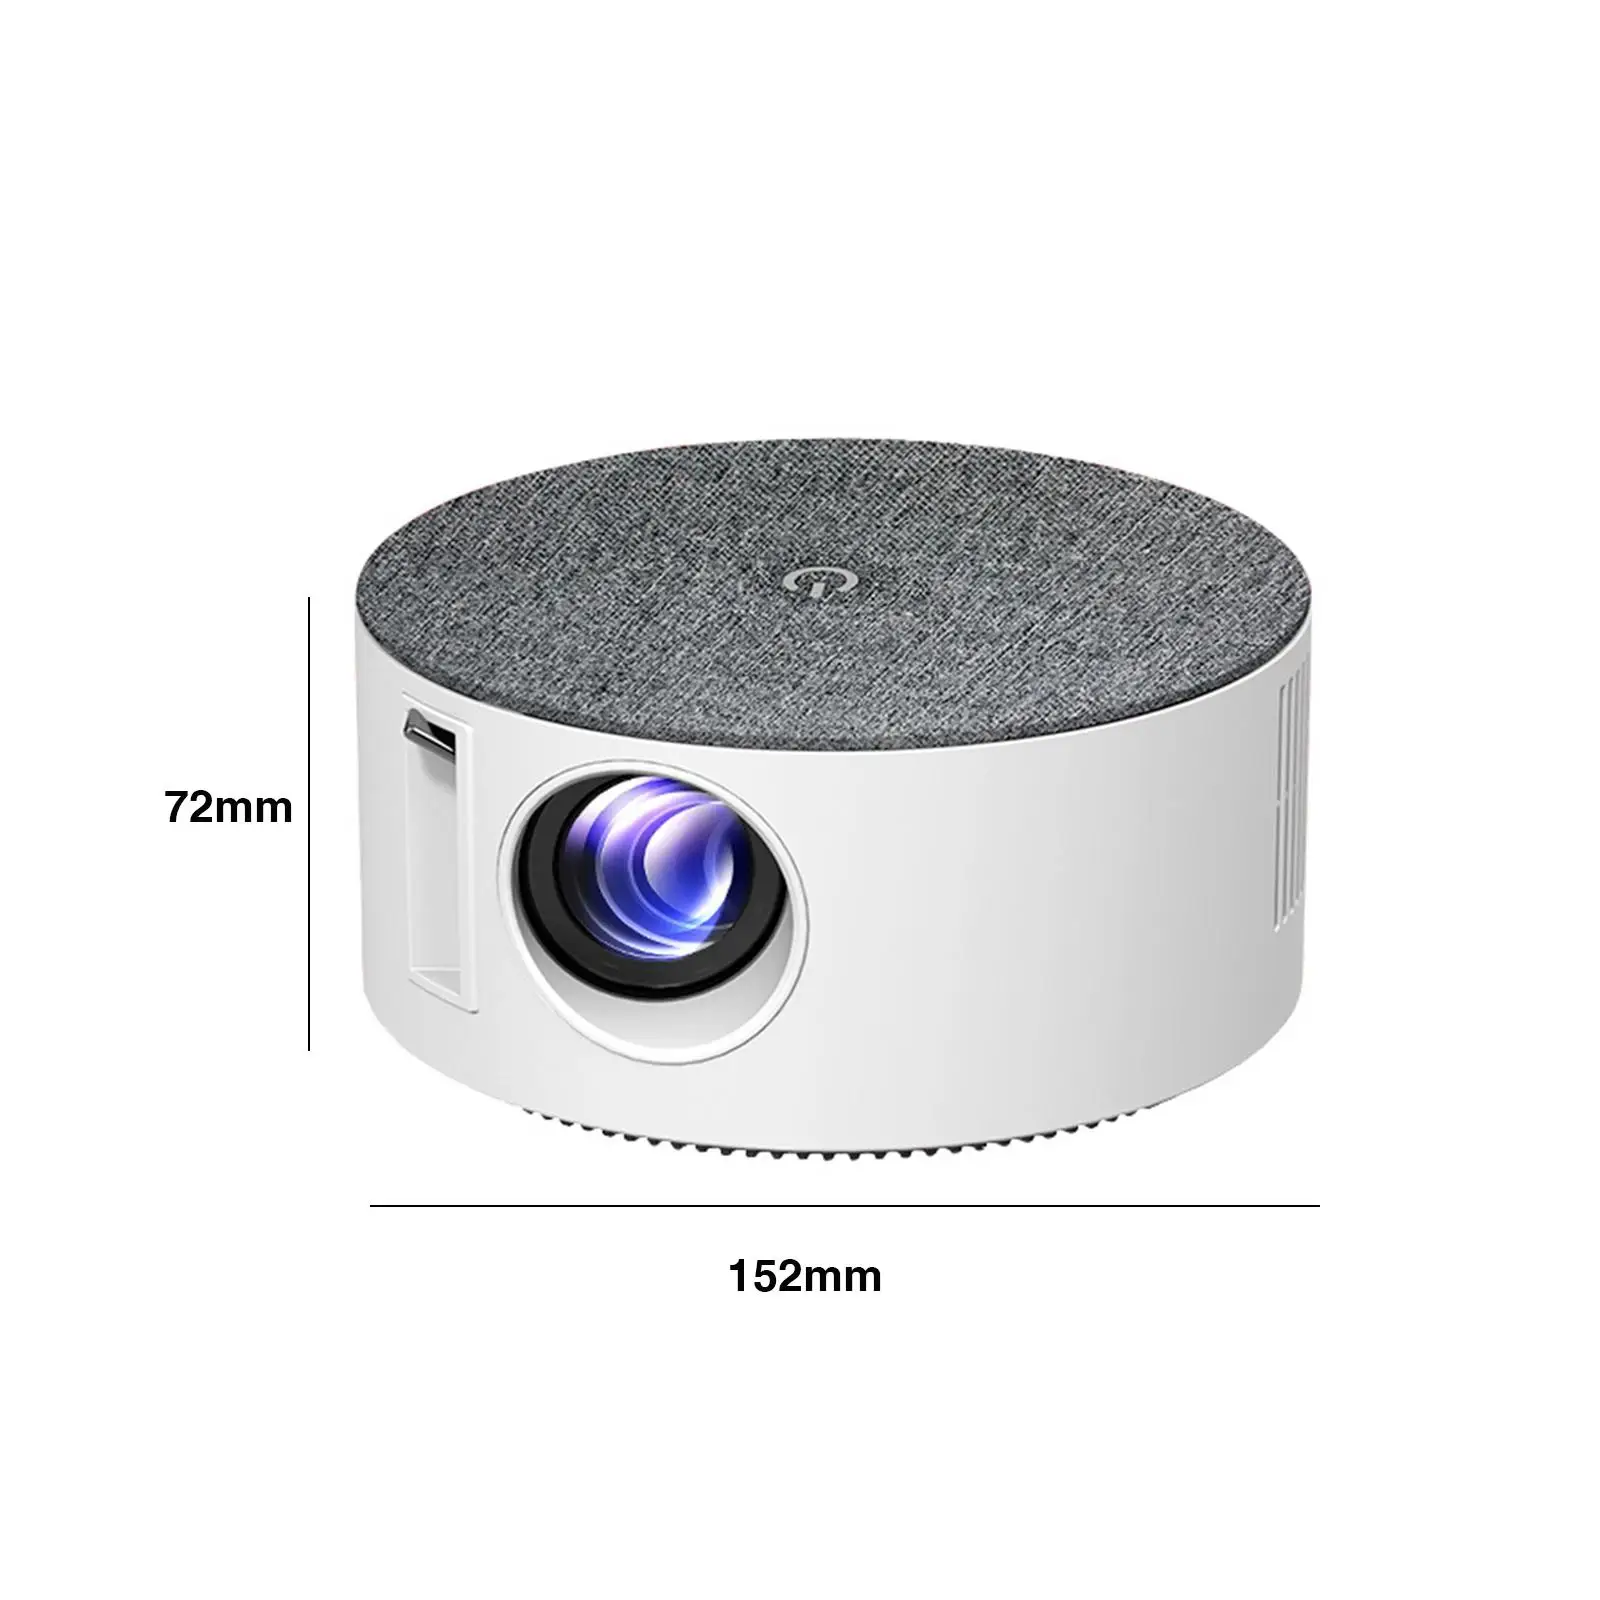 Portable Projector HD with Remote Control for Home Theater Mini Projector T50 Home Projector LED Pico Micro Video Projector US